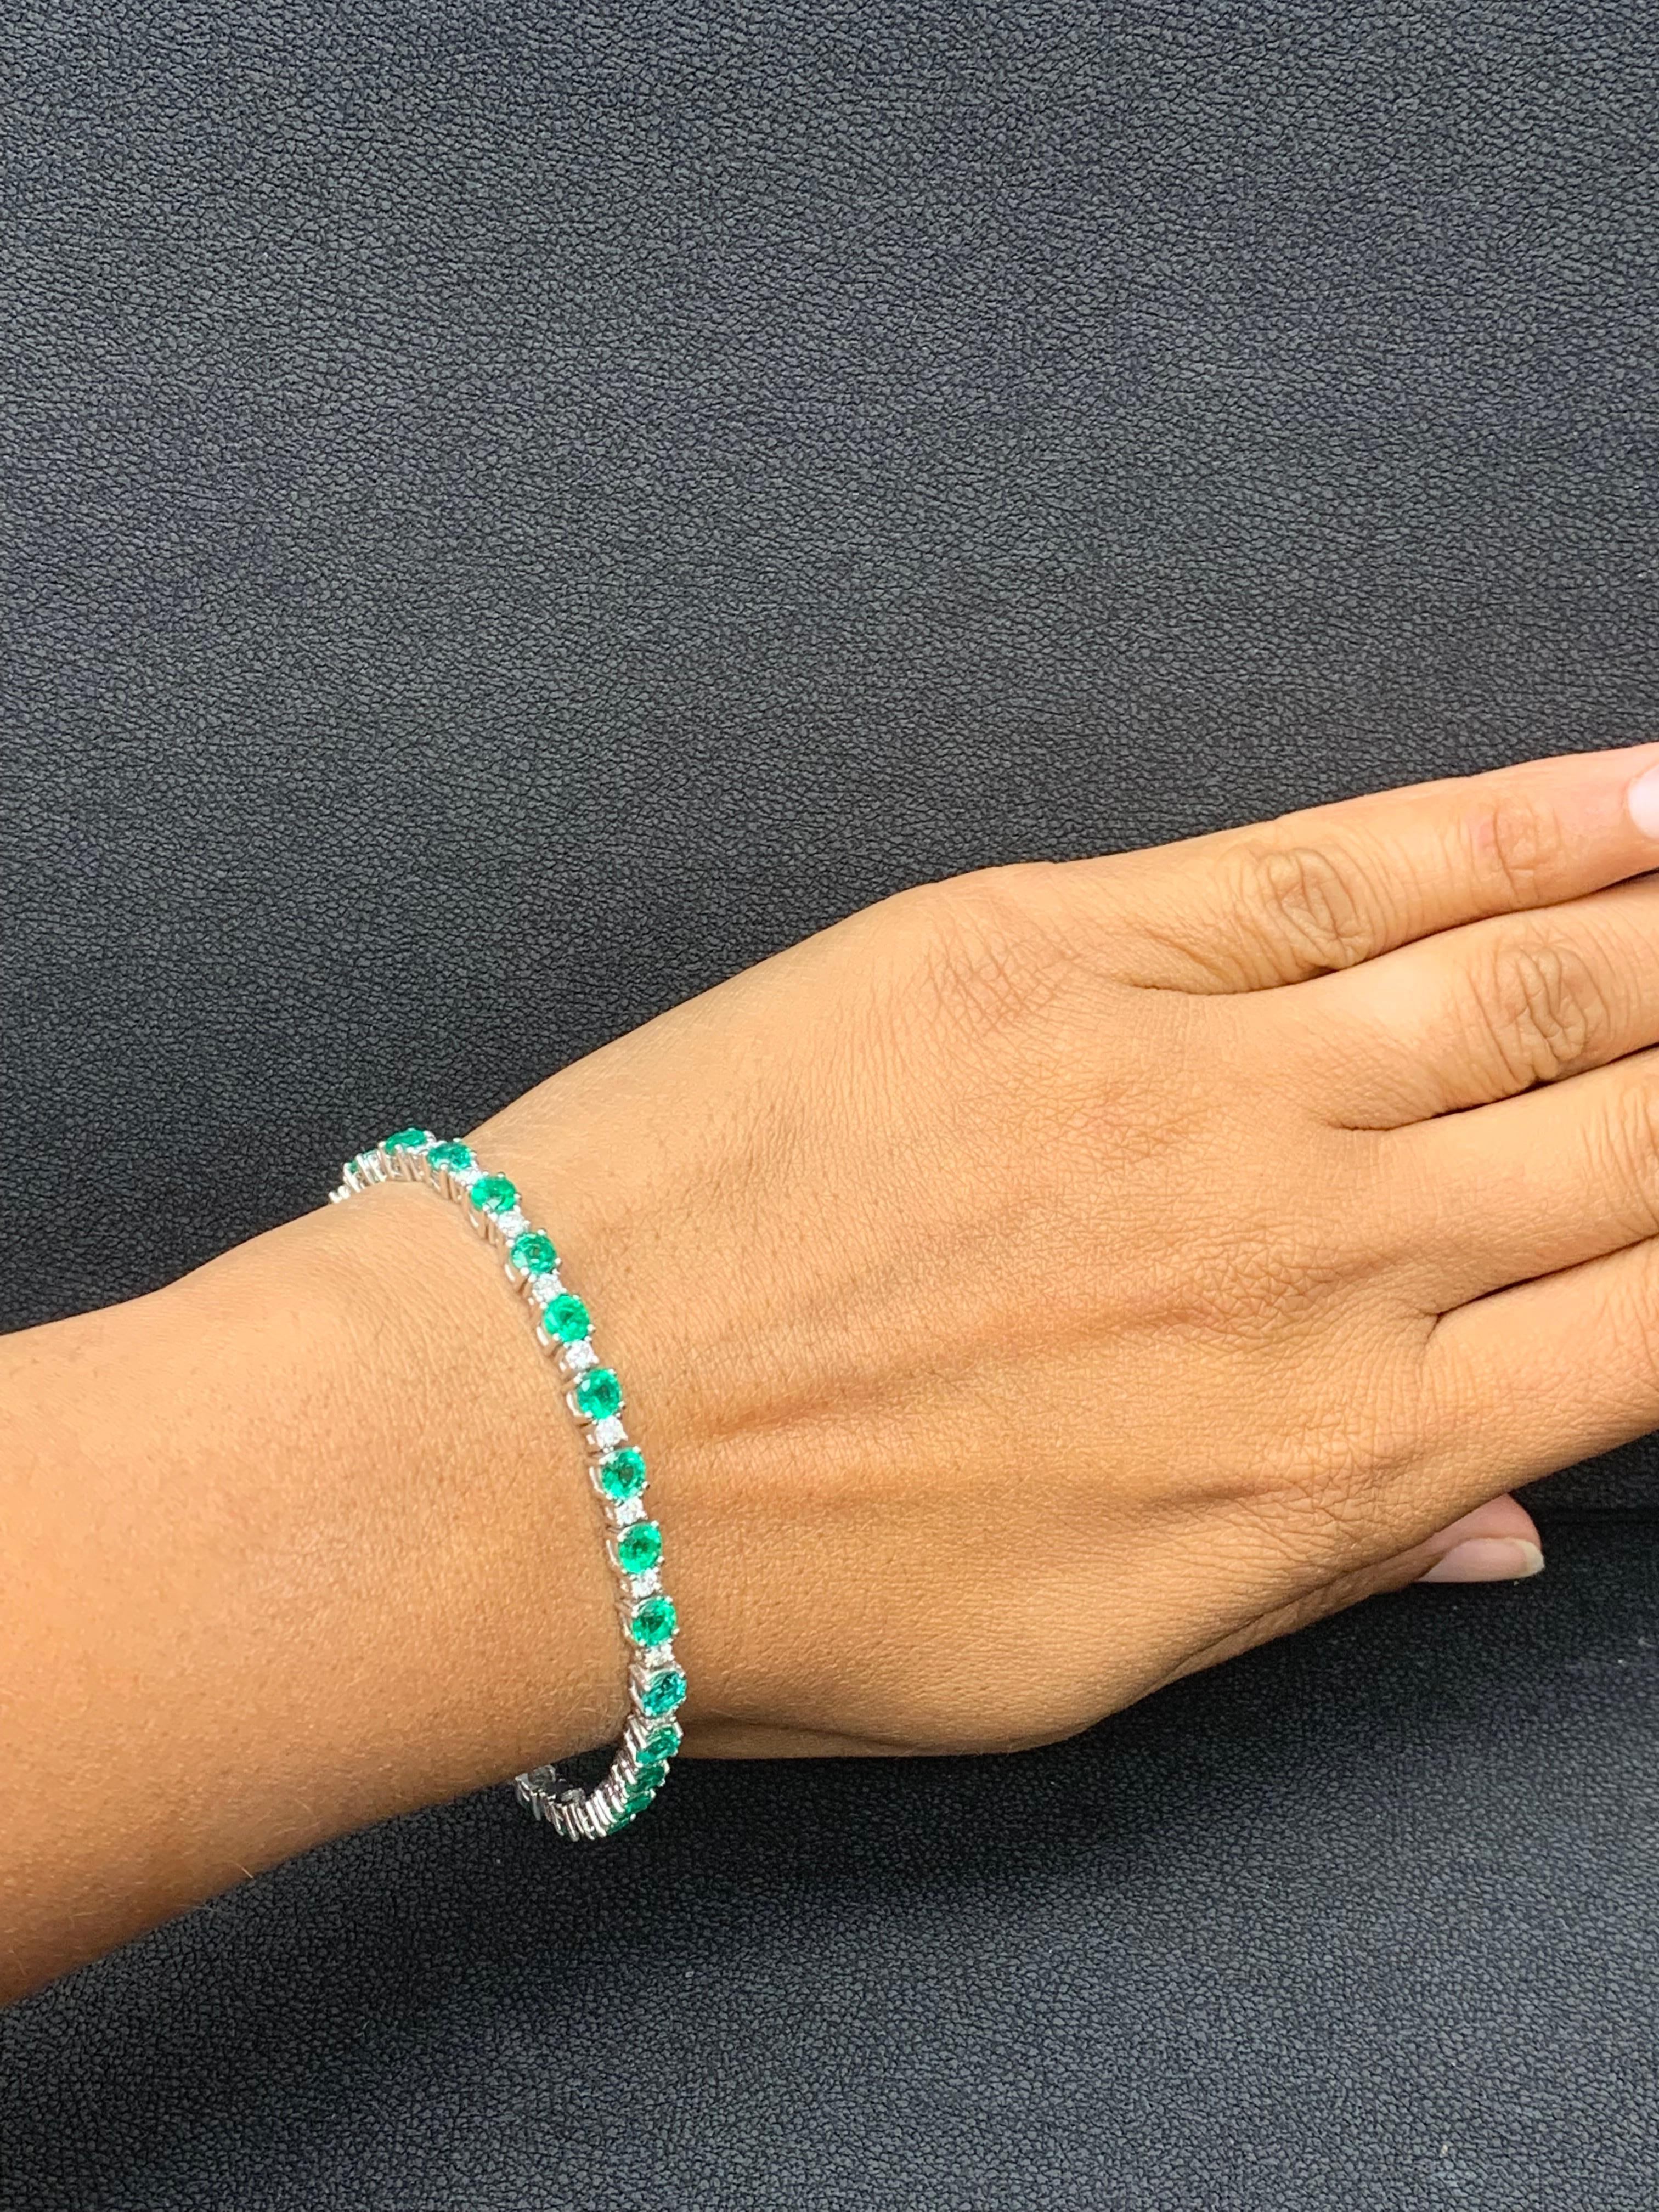 Showcasing 6.34 carats total of 27 green emeralds, elegantly alternating with 1.48 carats of 27 round brilliant diamonds. Made in 14 karat white gold.

Style available in different price ranges. Prices are based on your selection of the 4C’s (Carat,